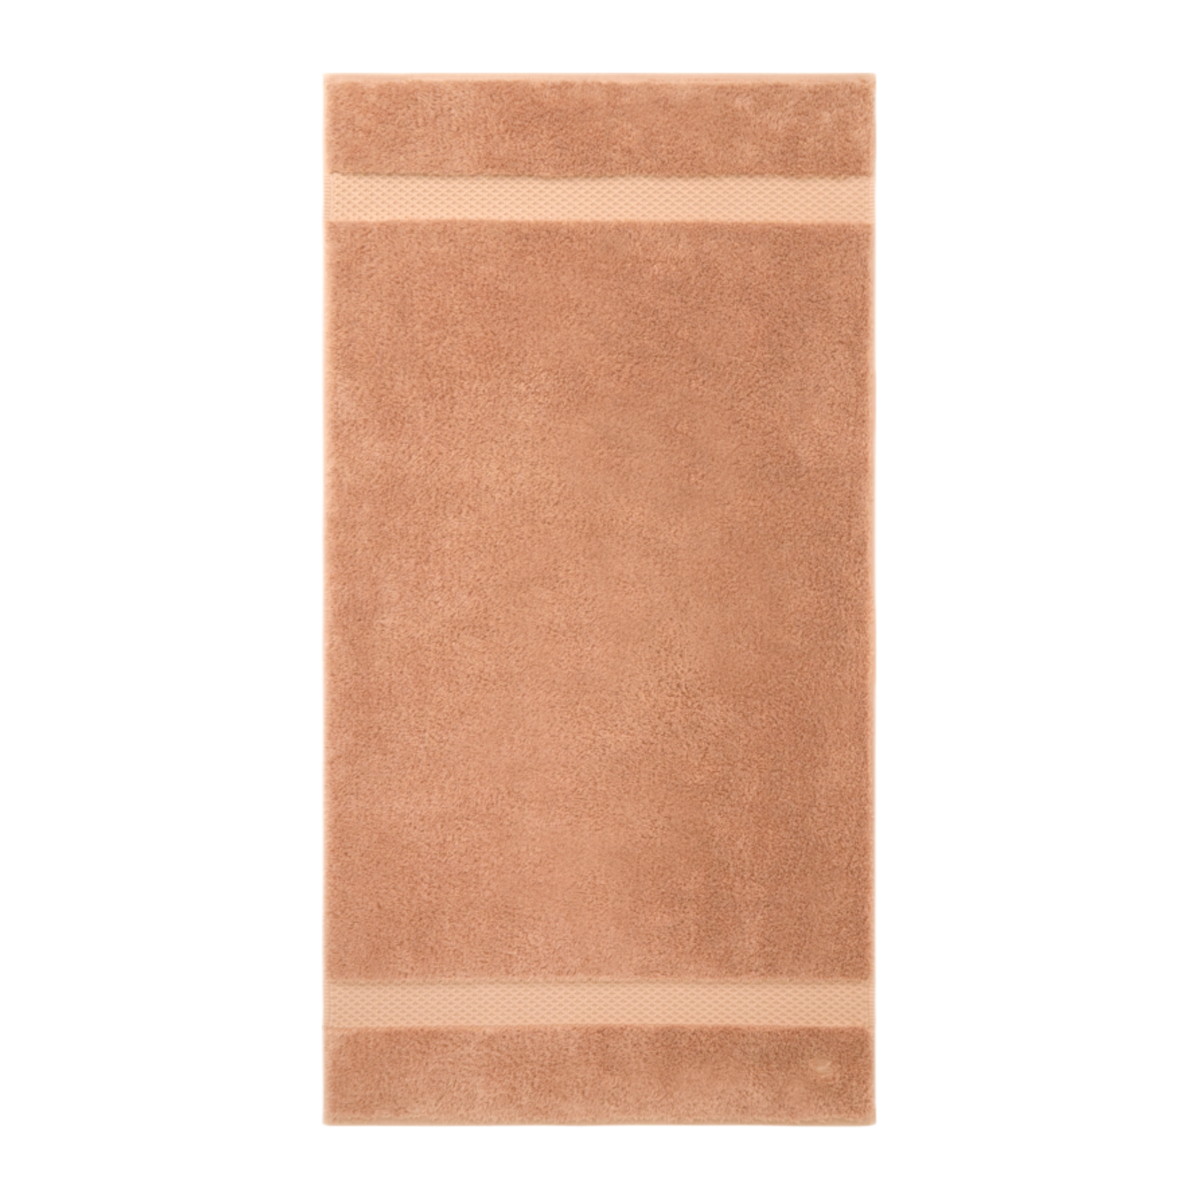 Hand Towel of Yves Delorme Etoile Bath Collection in Sienna Color